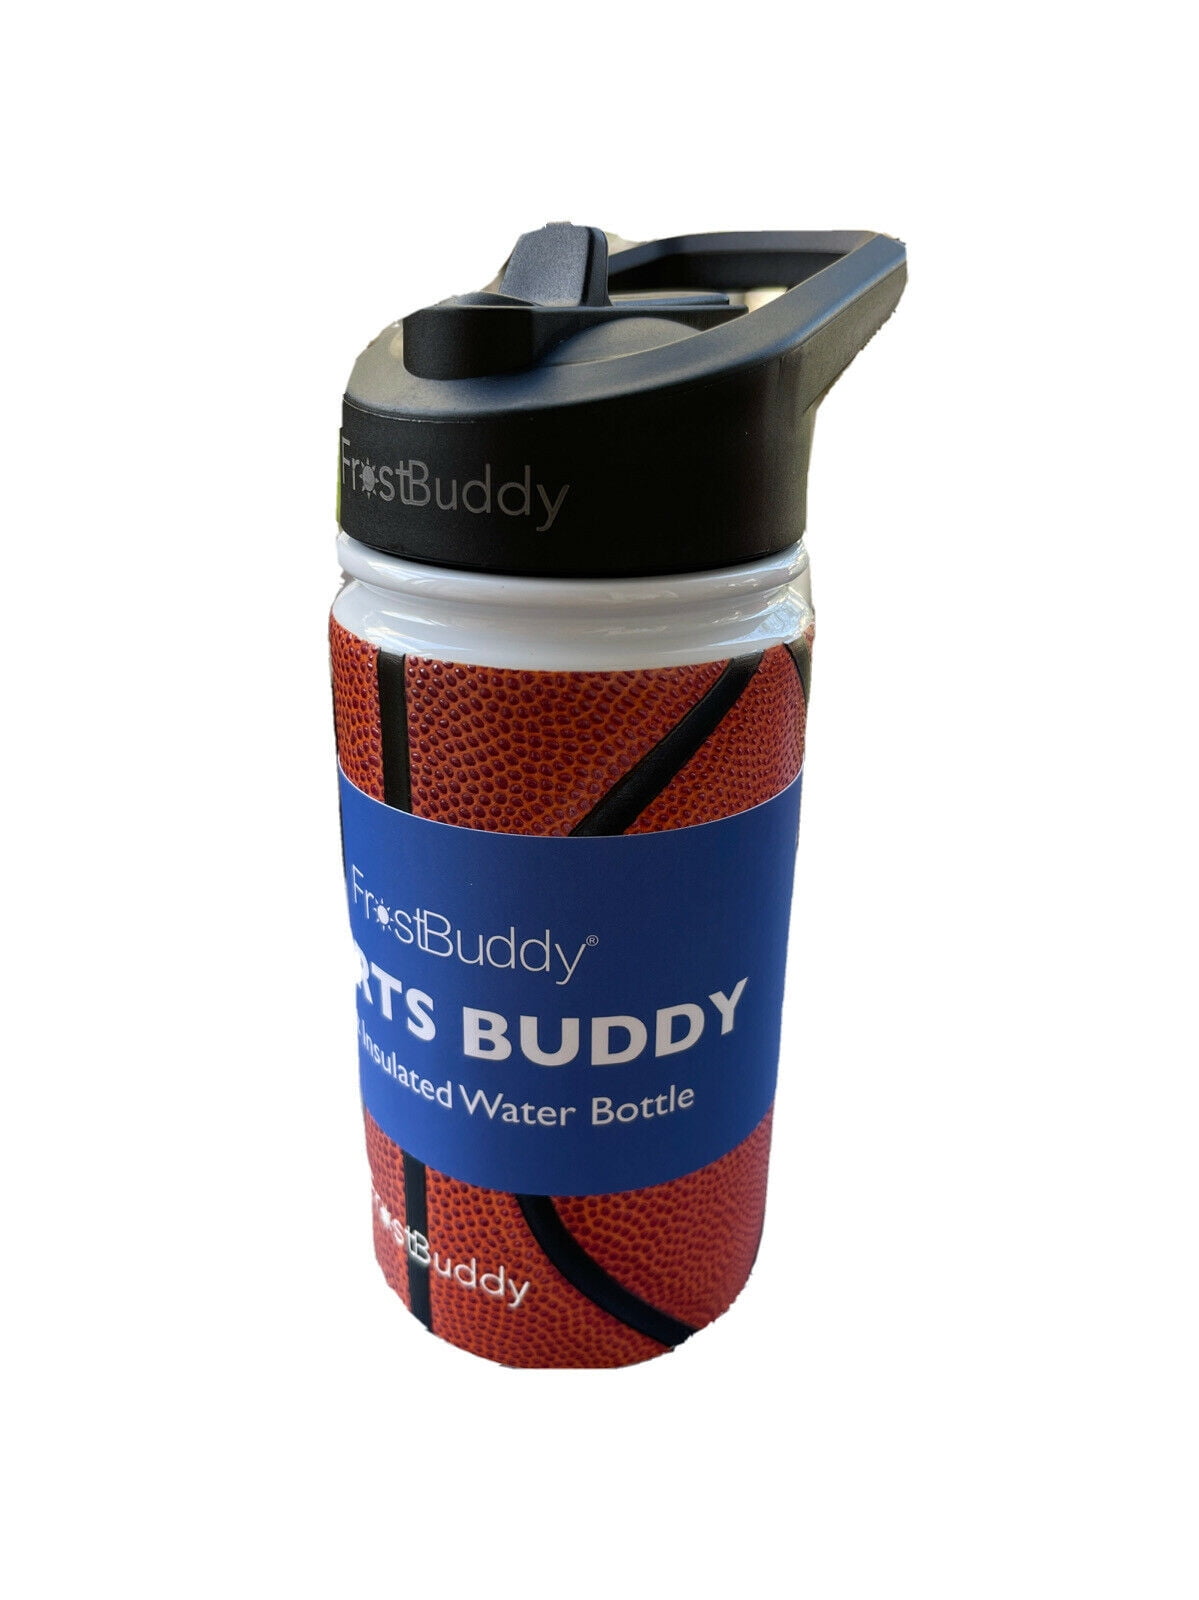 Lid & Paracord Handle Frost Buddy 24 Oz Buddy Water Bottle with Straw Stainless Steel Water Bottle for Traveling 24-Hour Coldest Insulated Water Bottle Sports & Errands 24 Oz Leak Free 